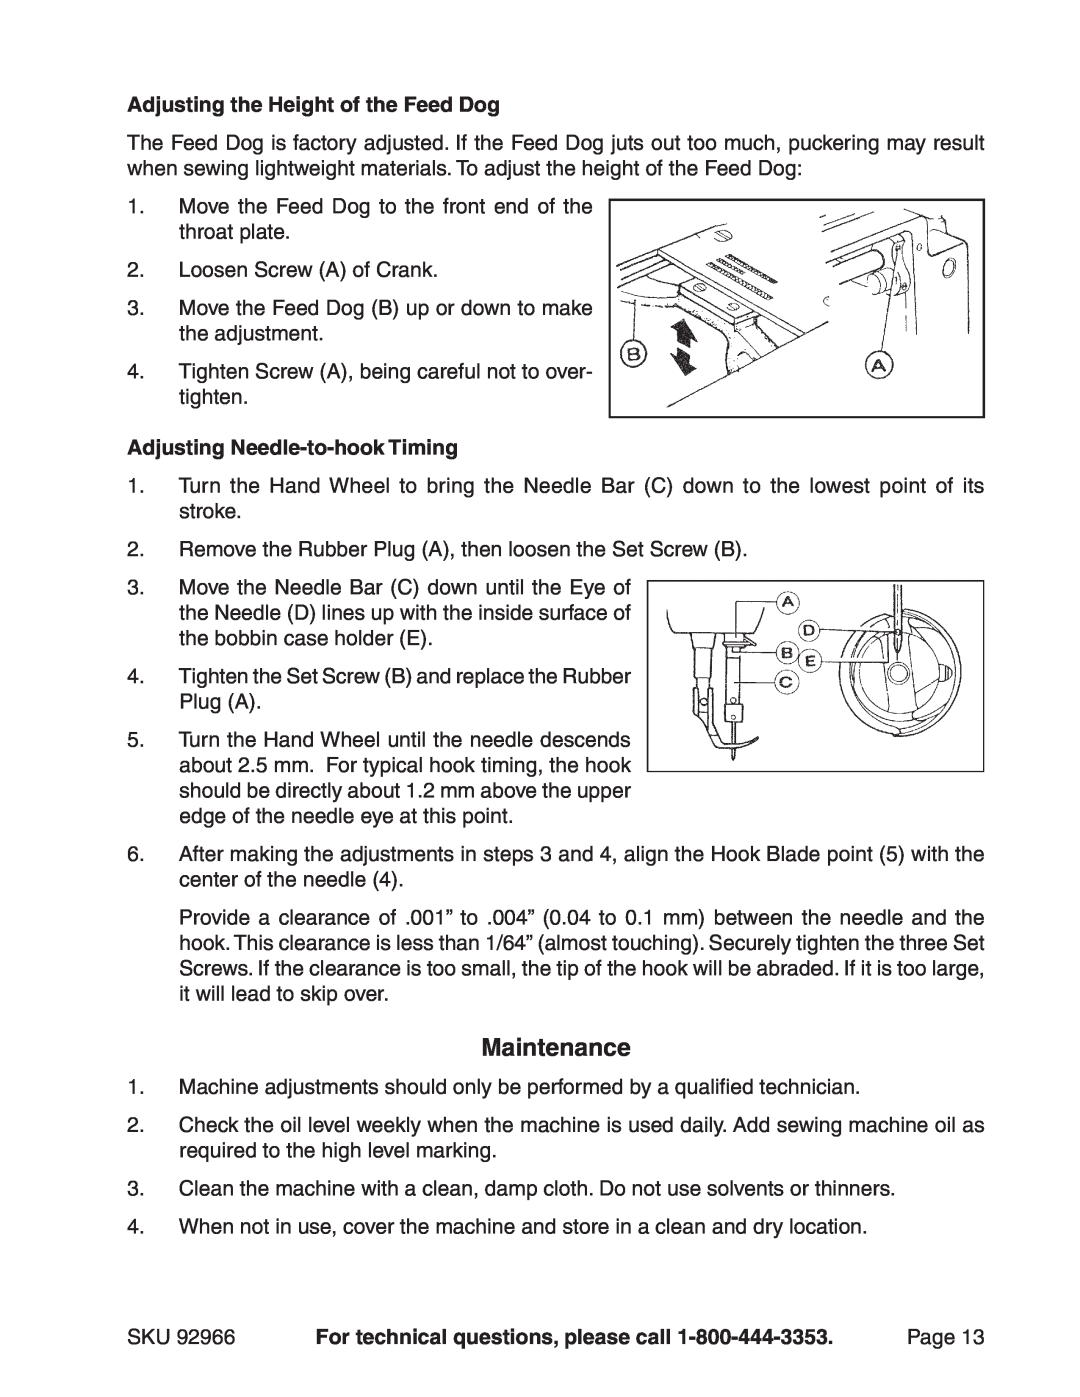 Harbor Freight Tools 92966 manual Maintenance, Adjusting the Height of the Feed Dog, Adjusting Needle-to-hook Timing 